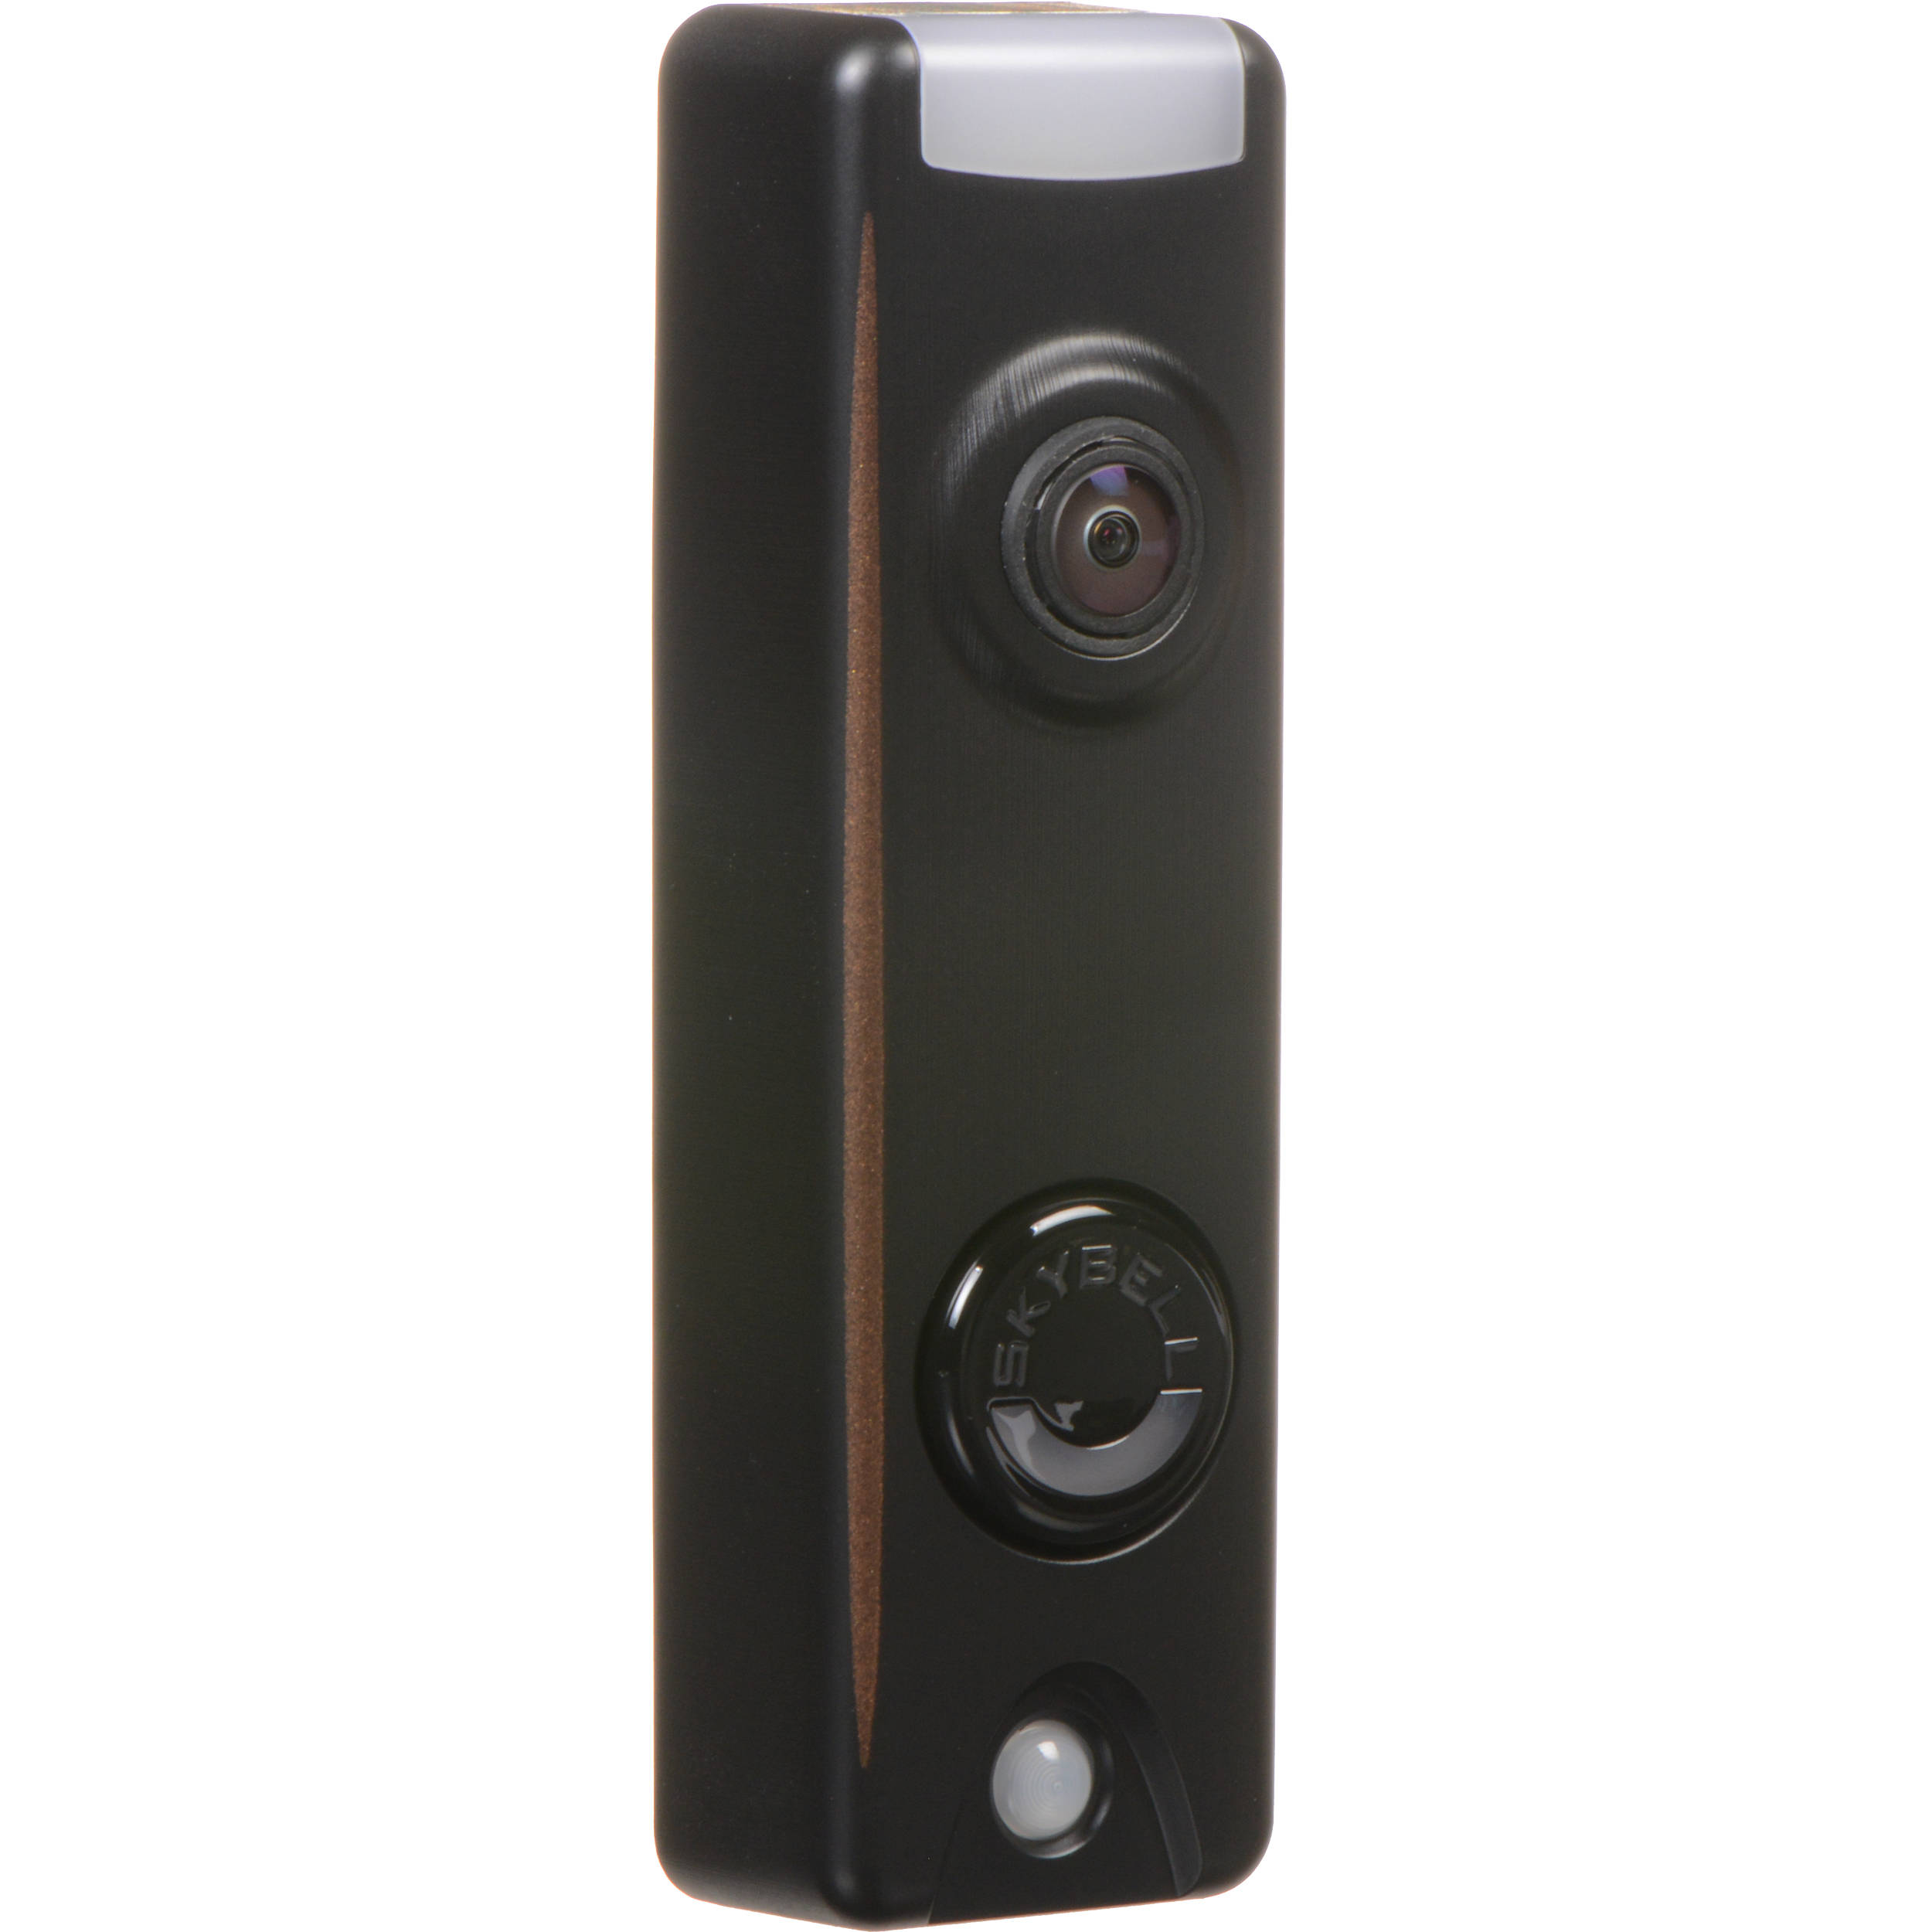 skybell security camera